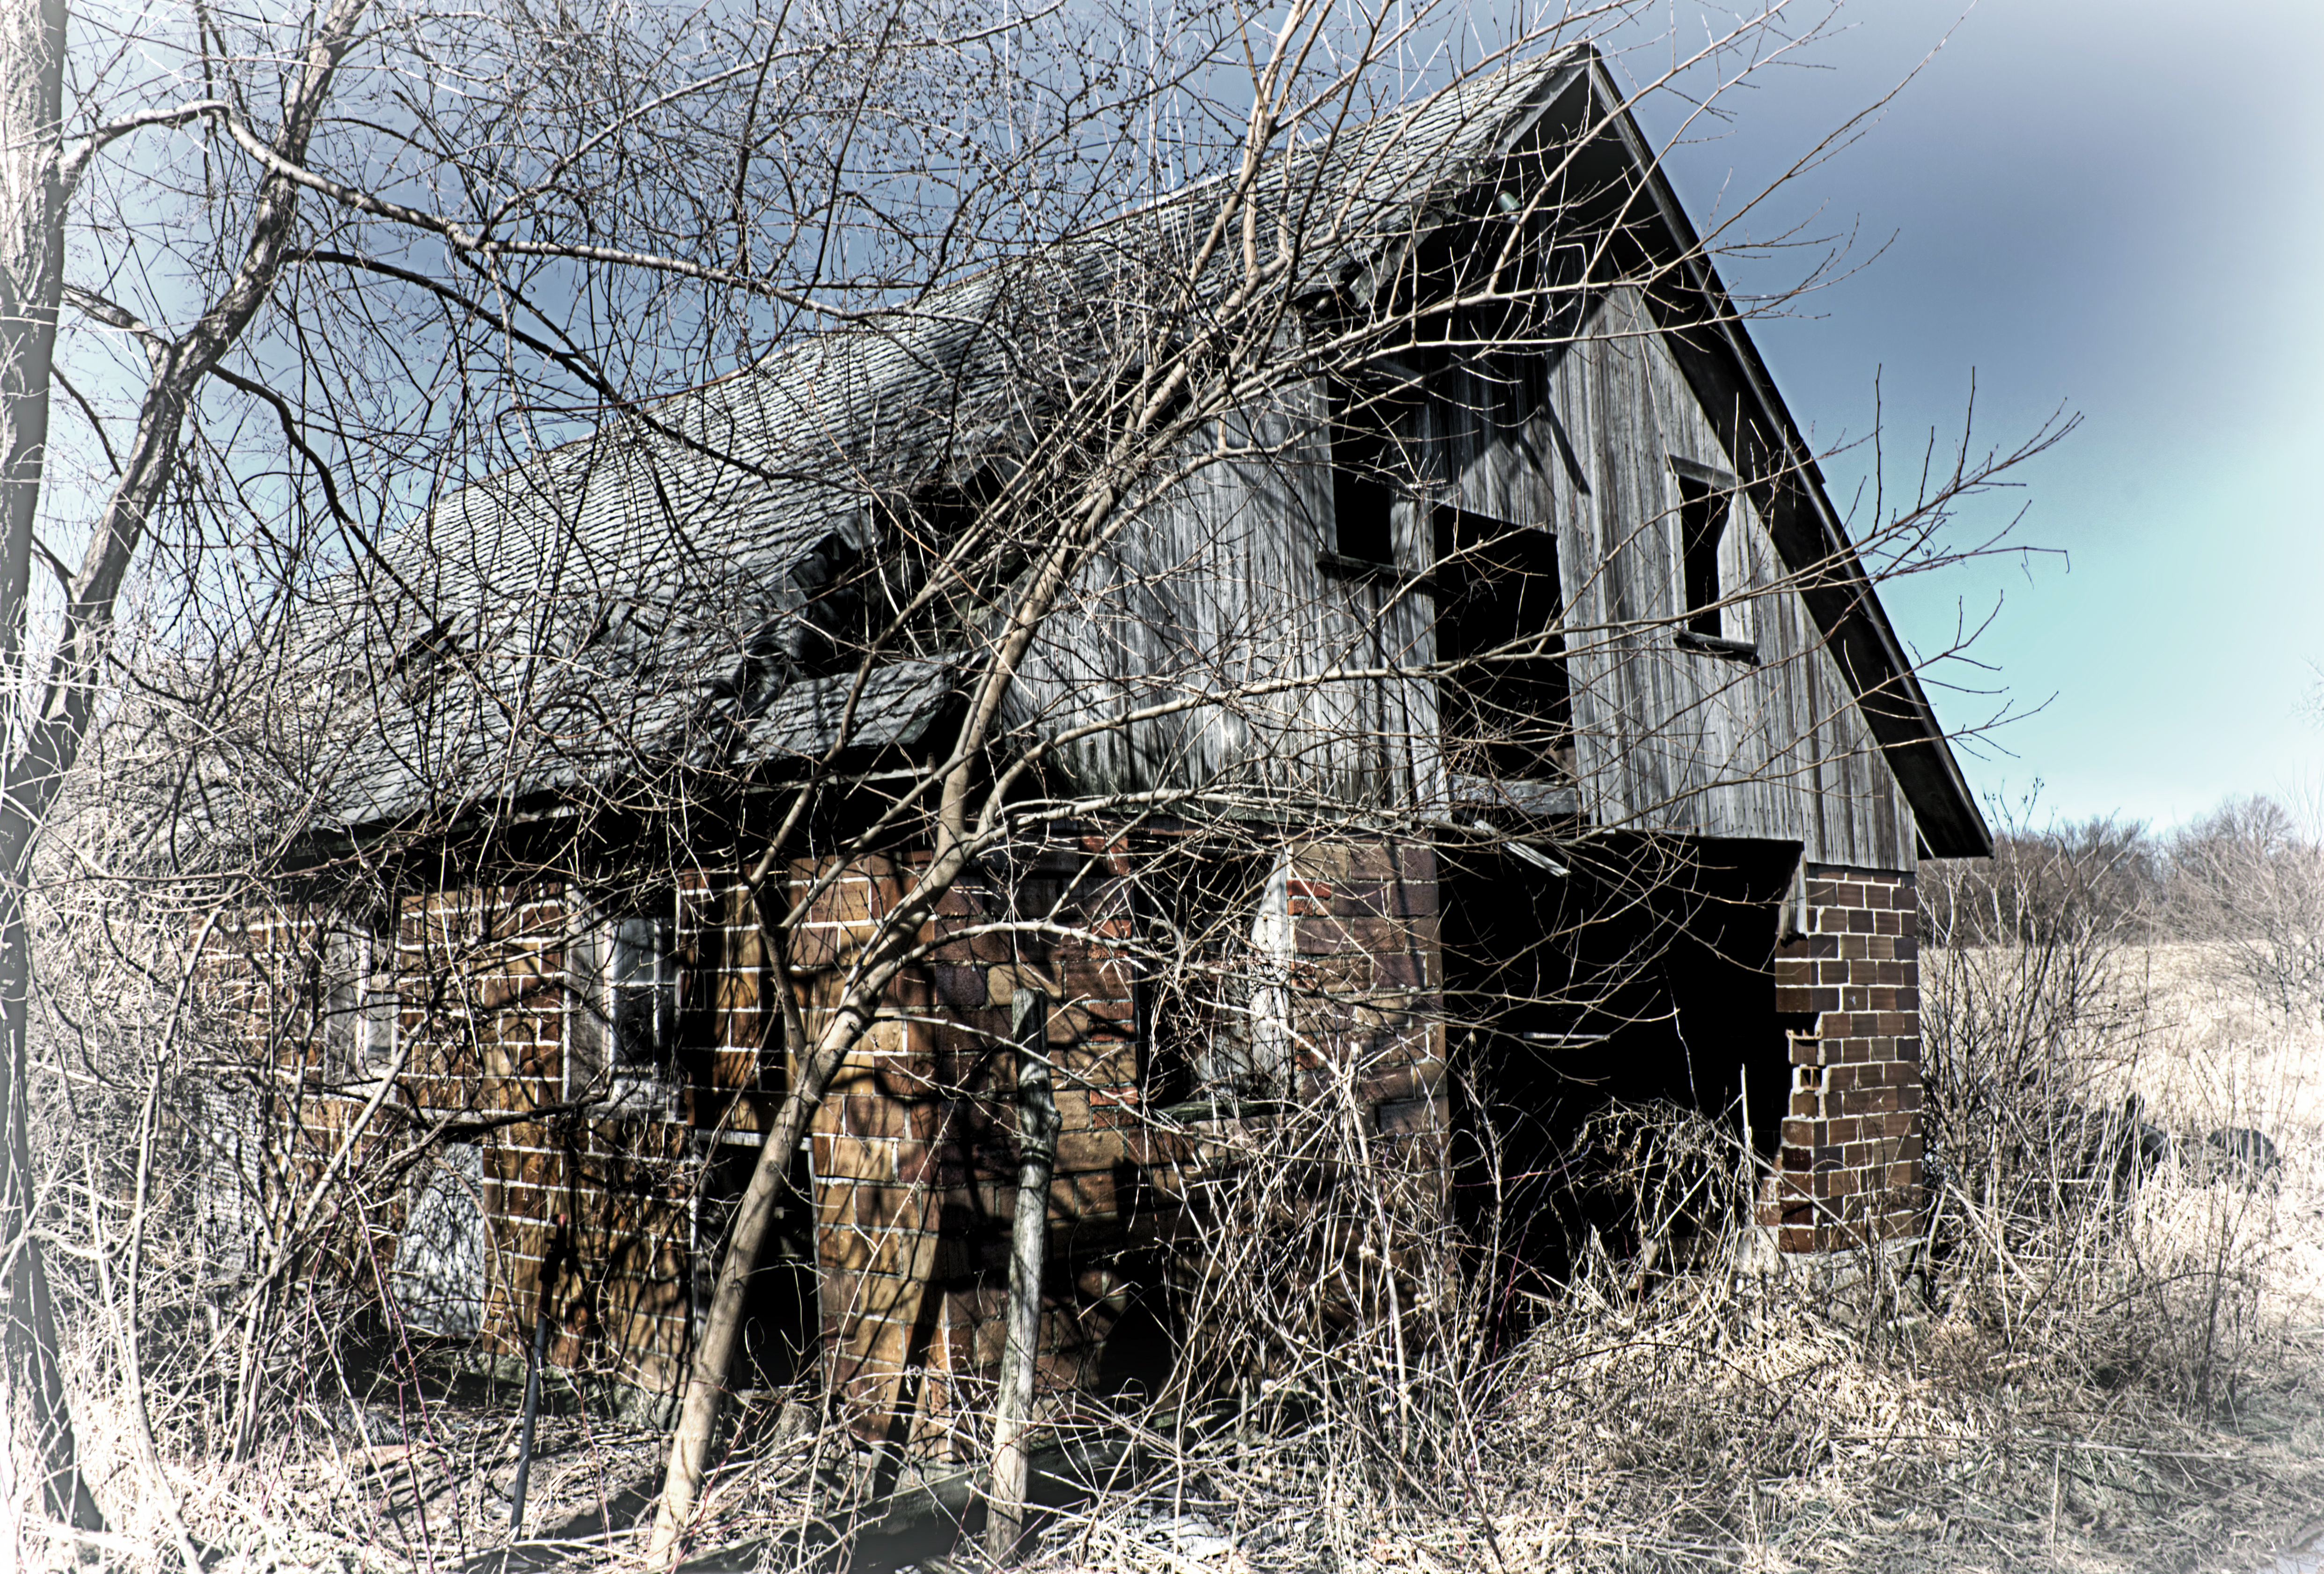 Abandoned Barn in March | Edward Byrne: Photography Journal, 2013